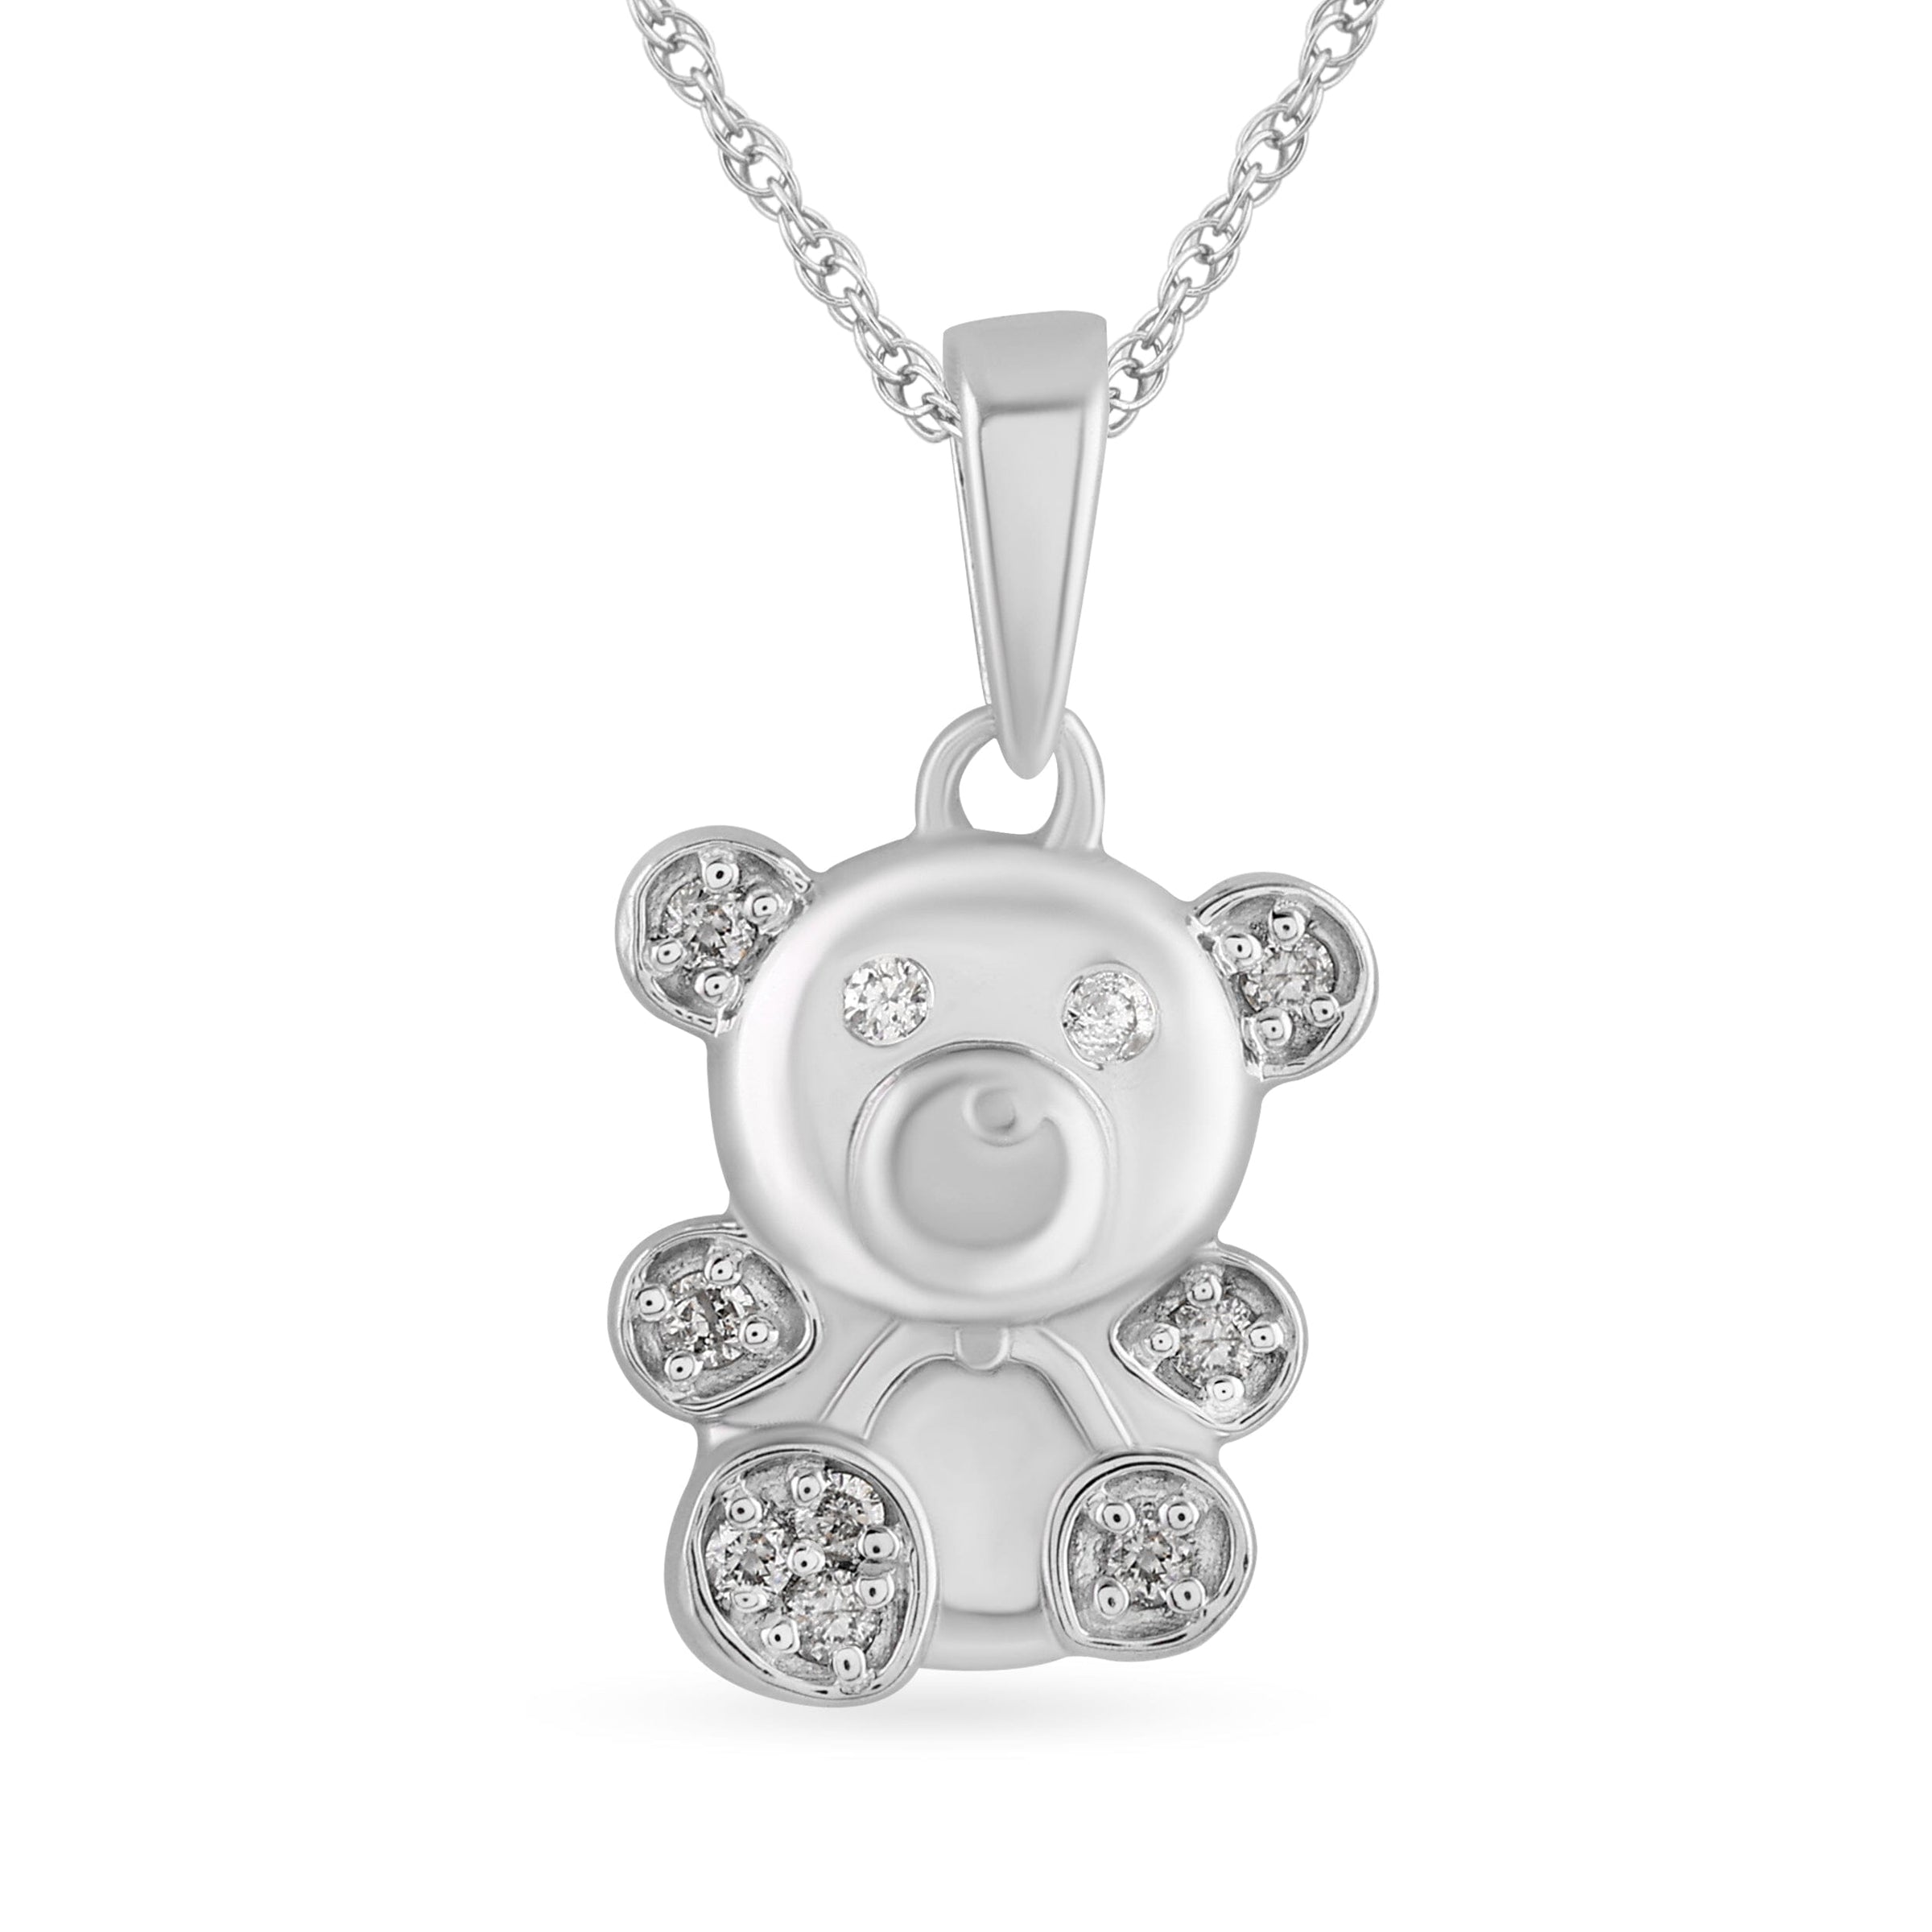 Children's Teddy Bear Necklace with 0.05ct of Diamonds in Sterling Silver Necklaces Bevilles 